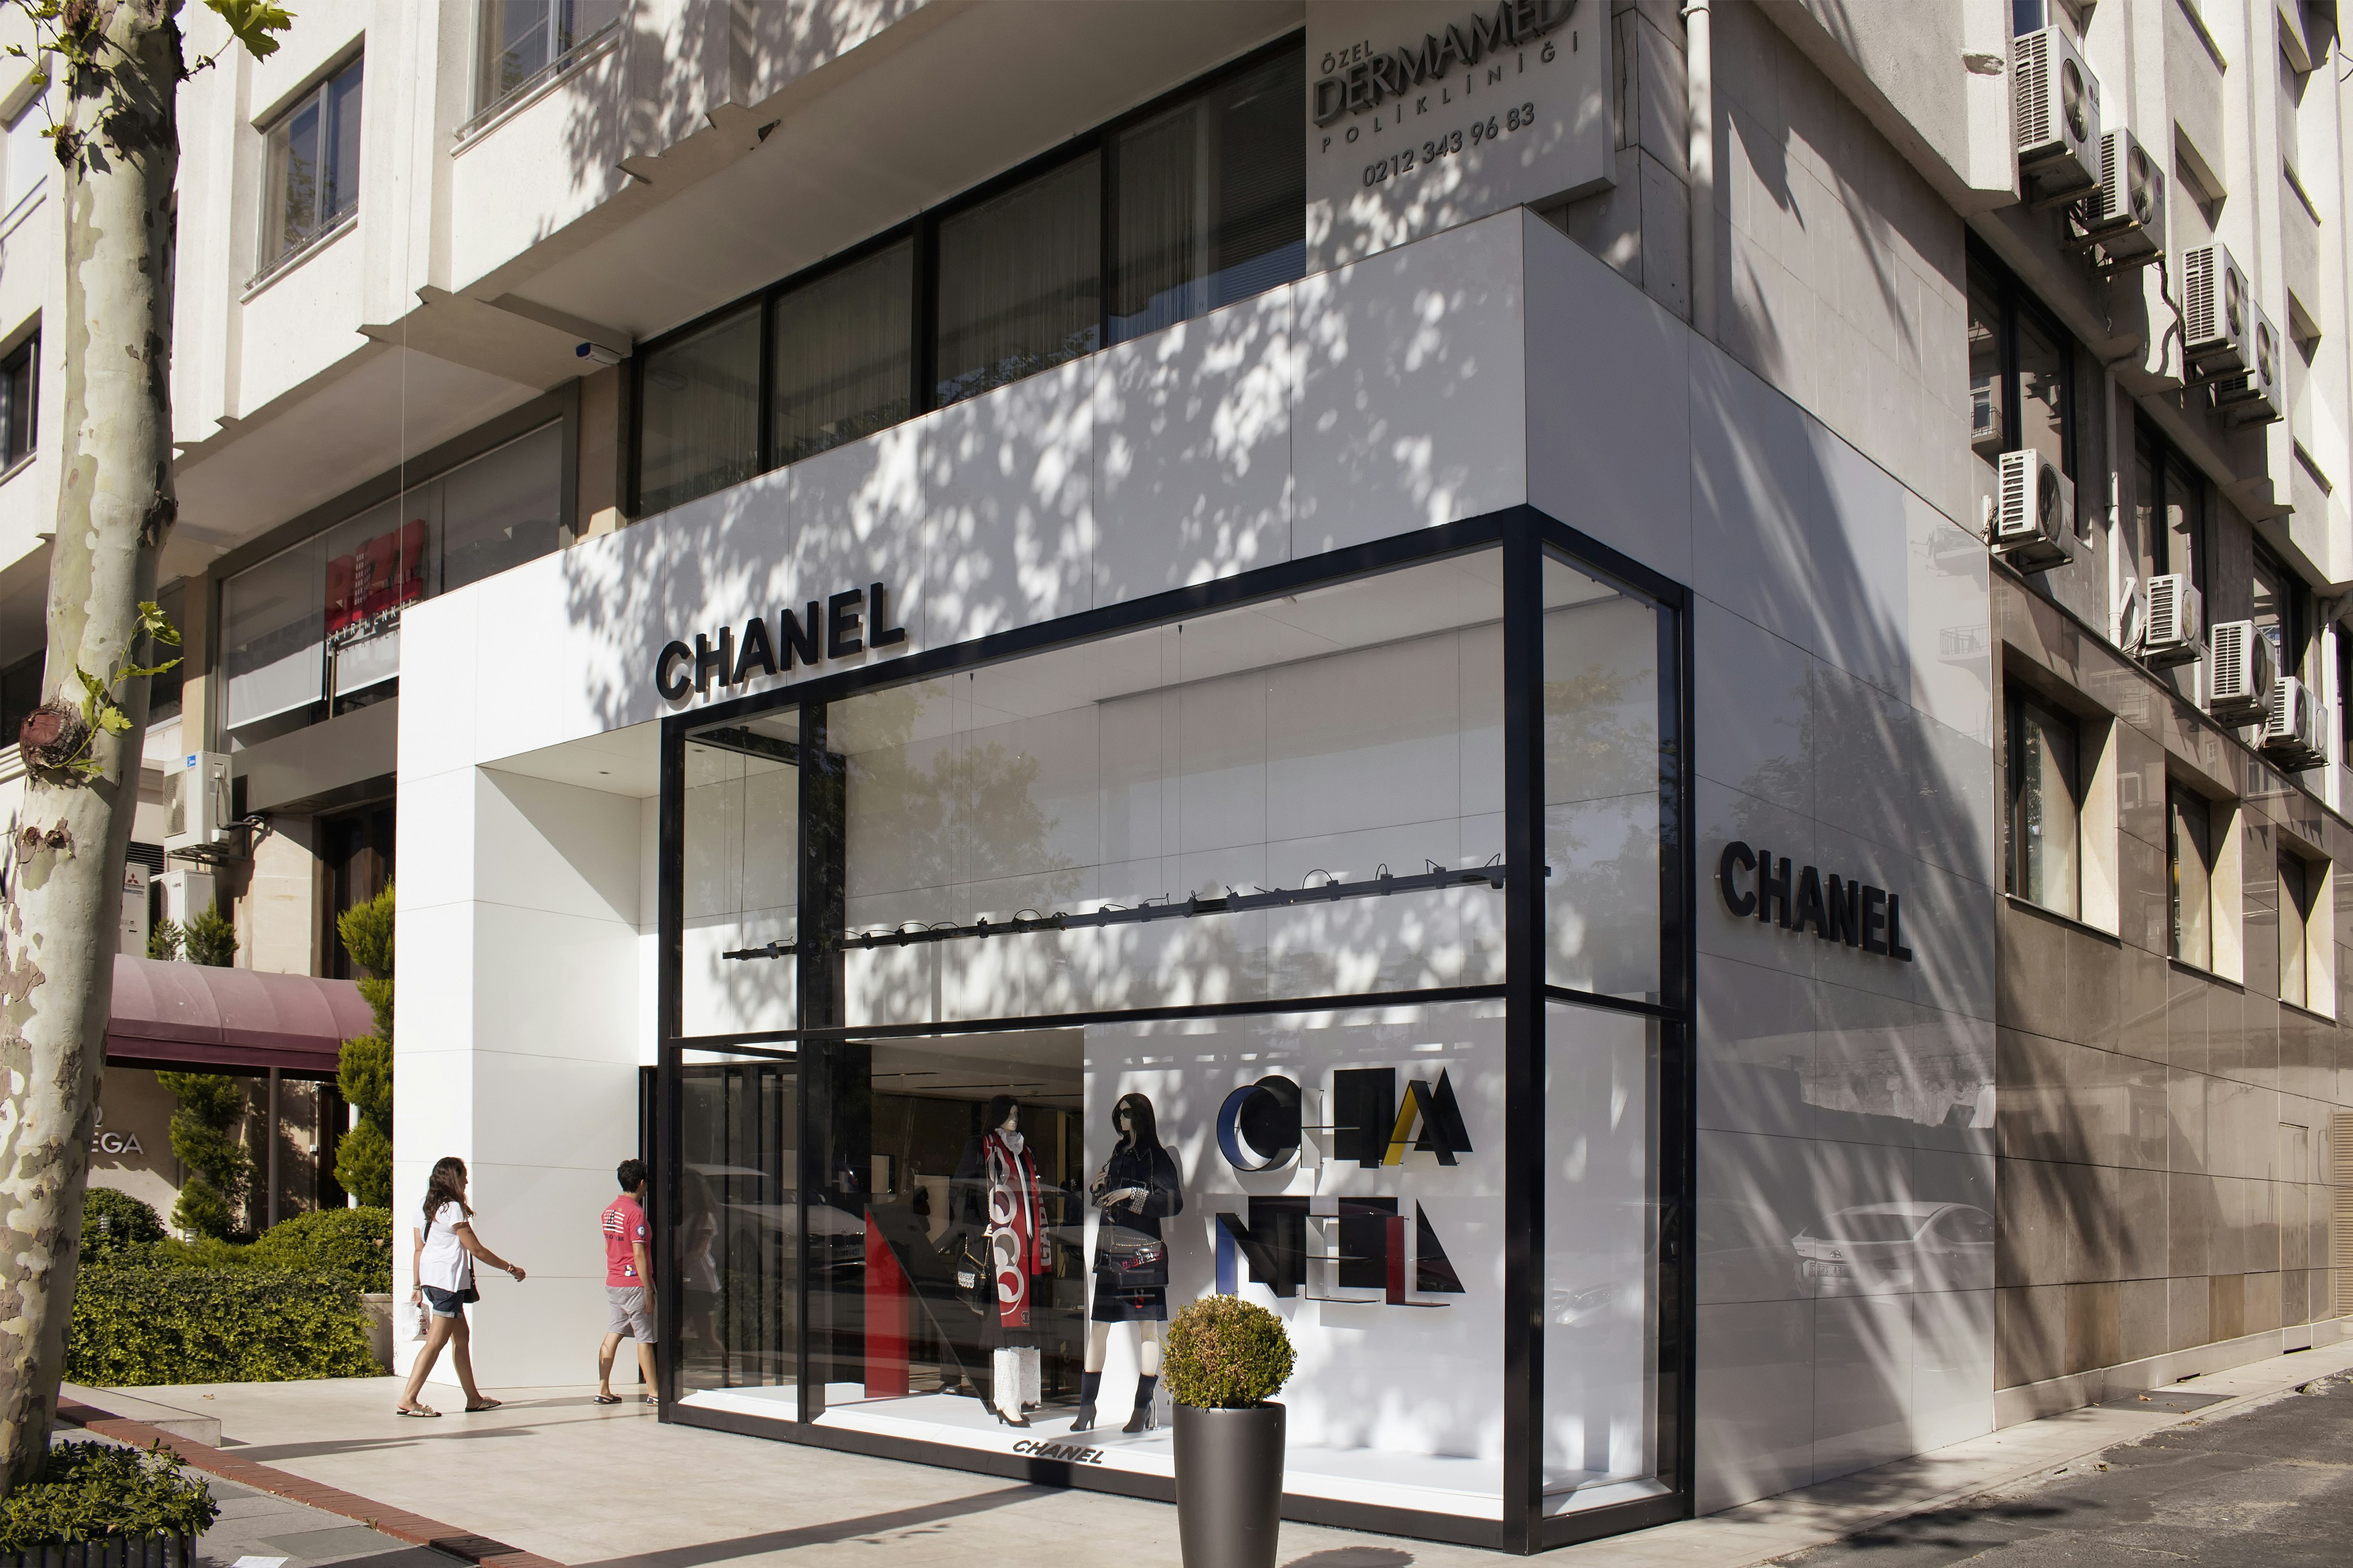 Two people are walking in to a Chanel store in the upmarket district of Nişantaşı in Istanbul. The store has an elegant black and white facade.